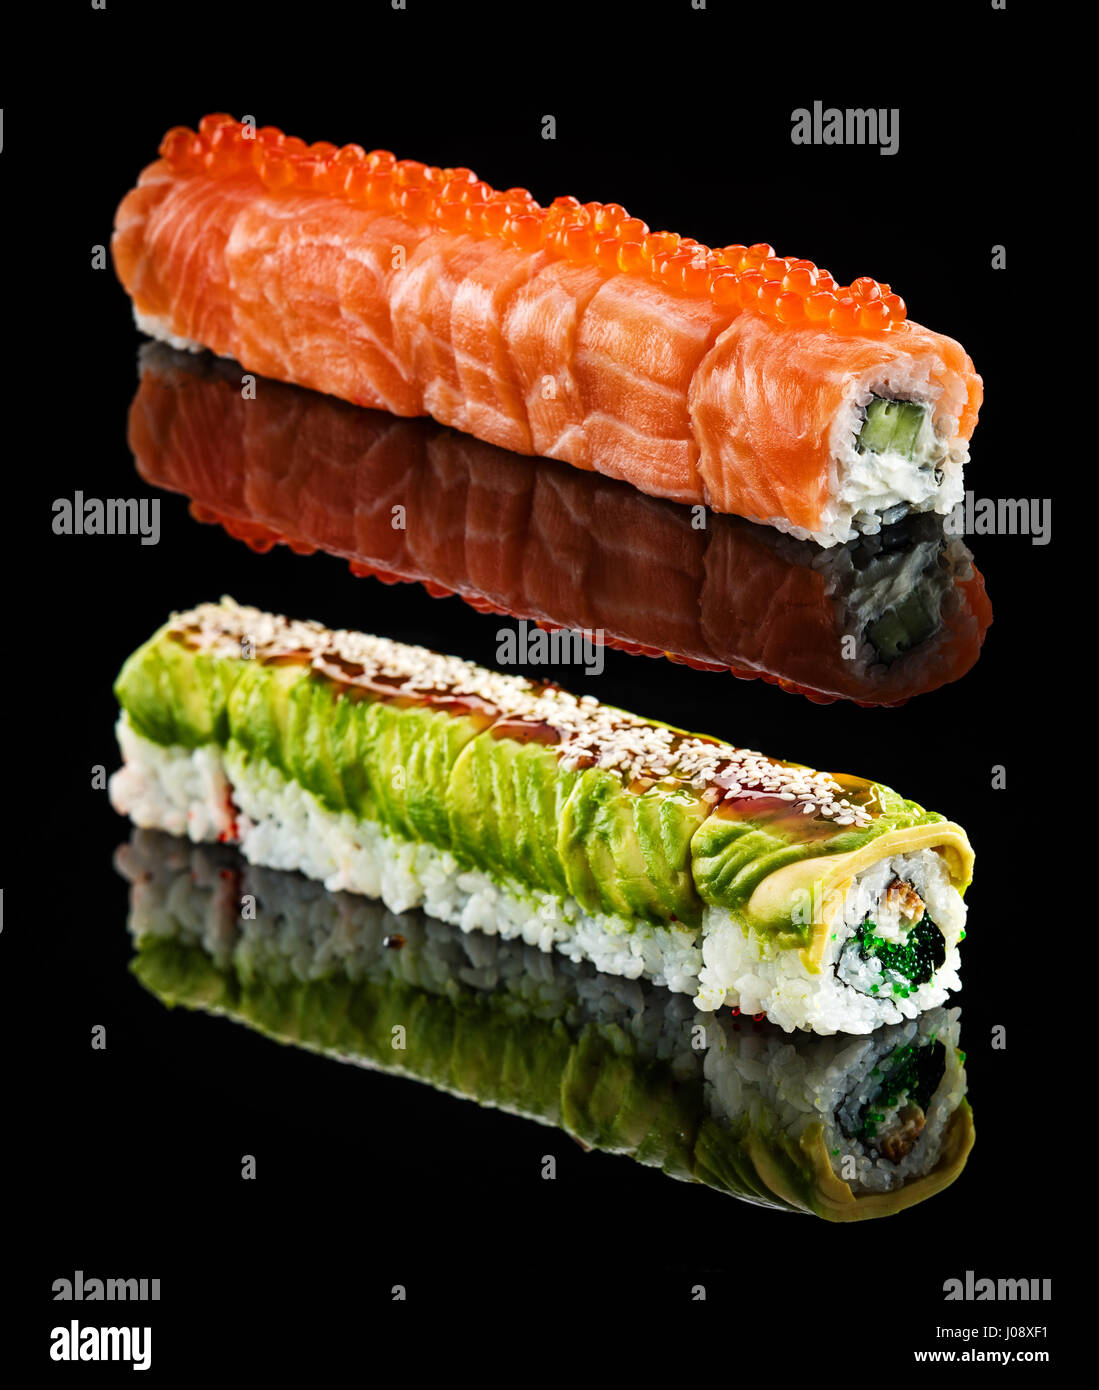 Dragon roll with salmon and red caviar and dragon roll with avocado and flying fish roe over black background Stock Photo